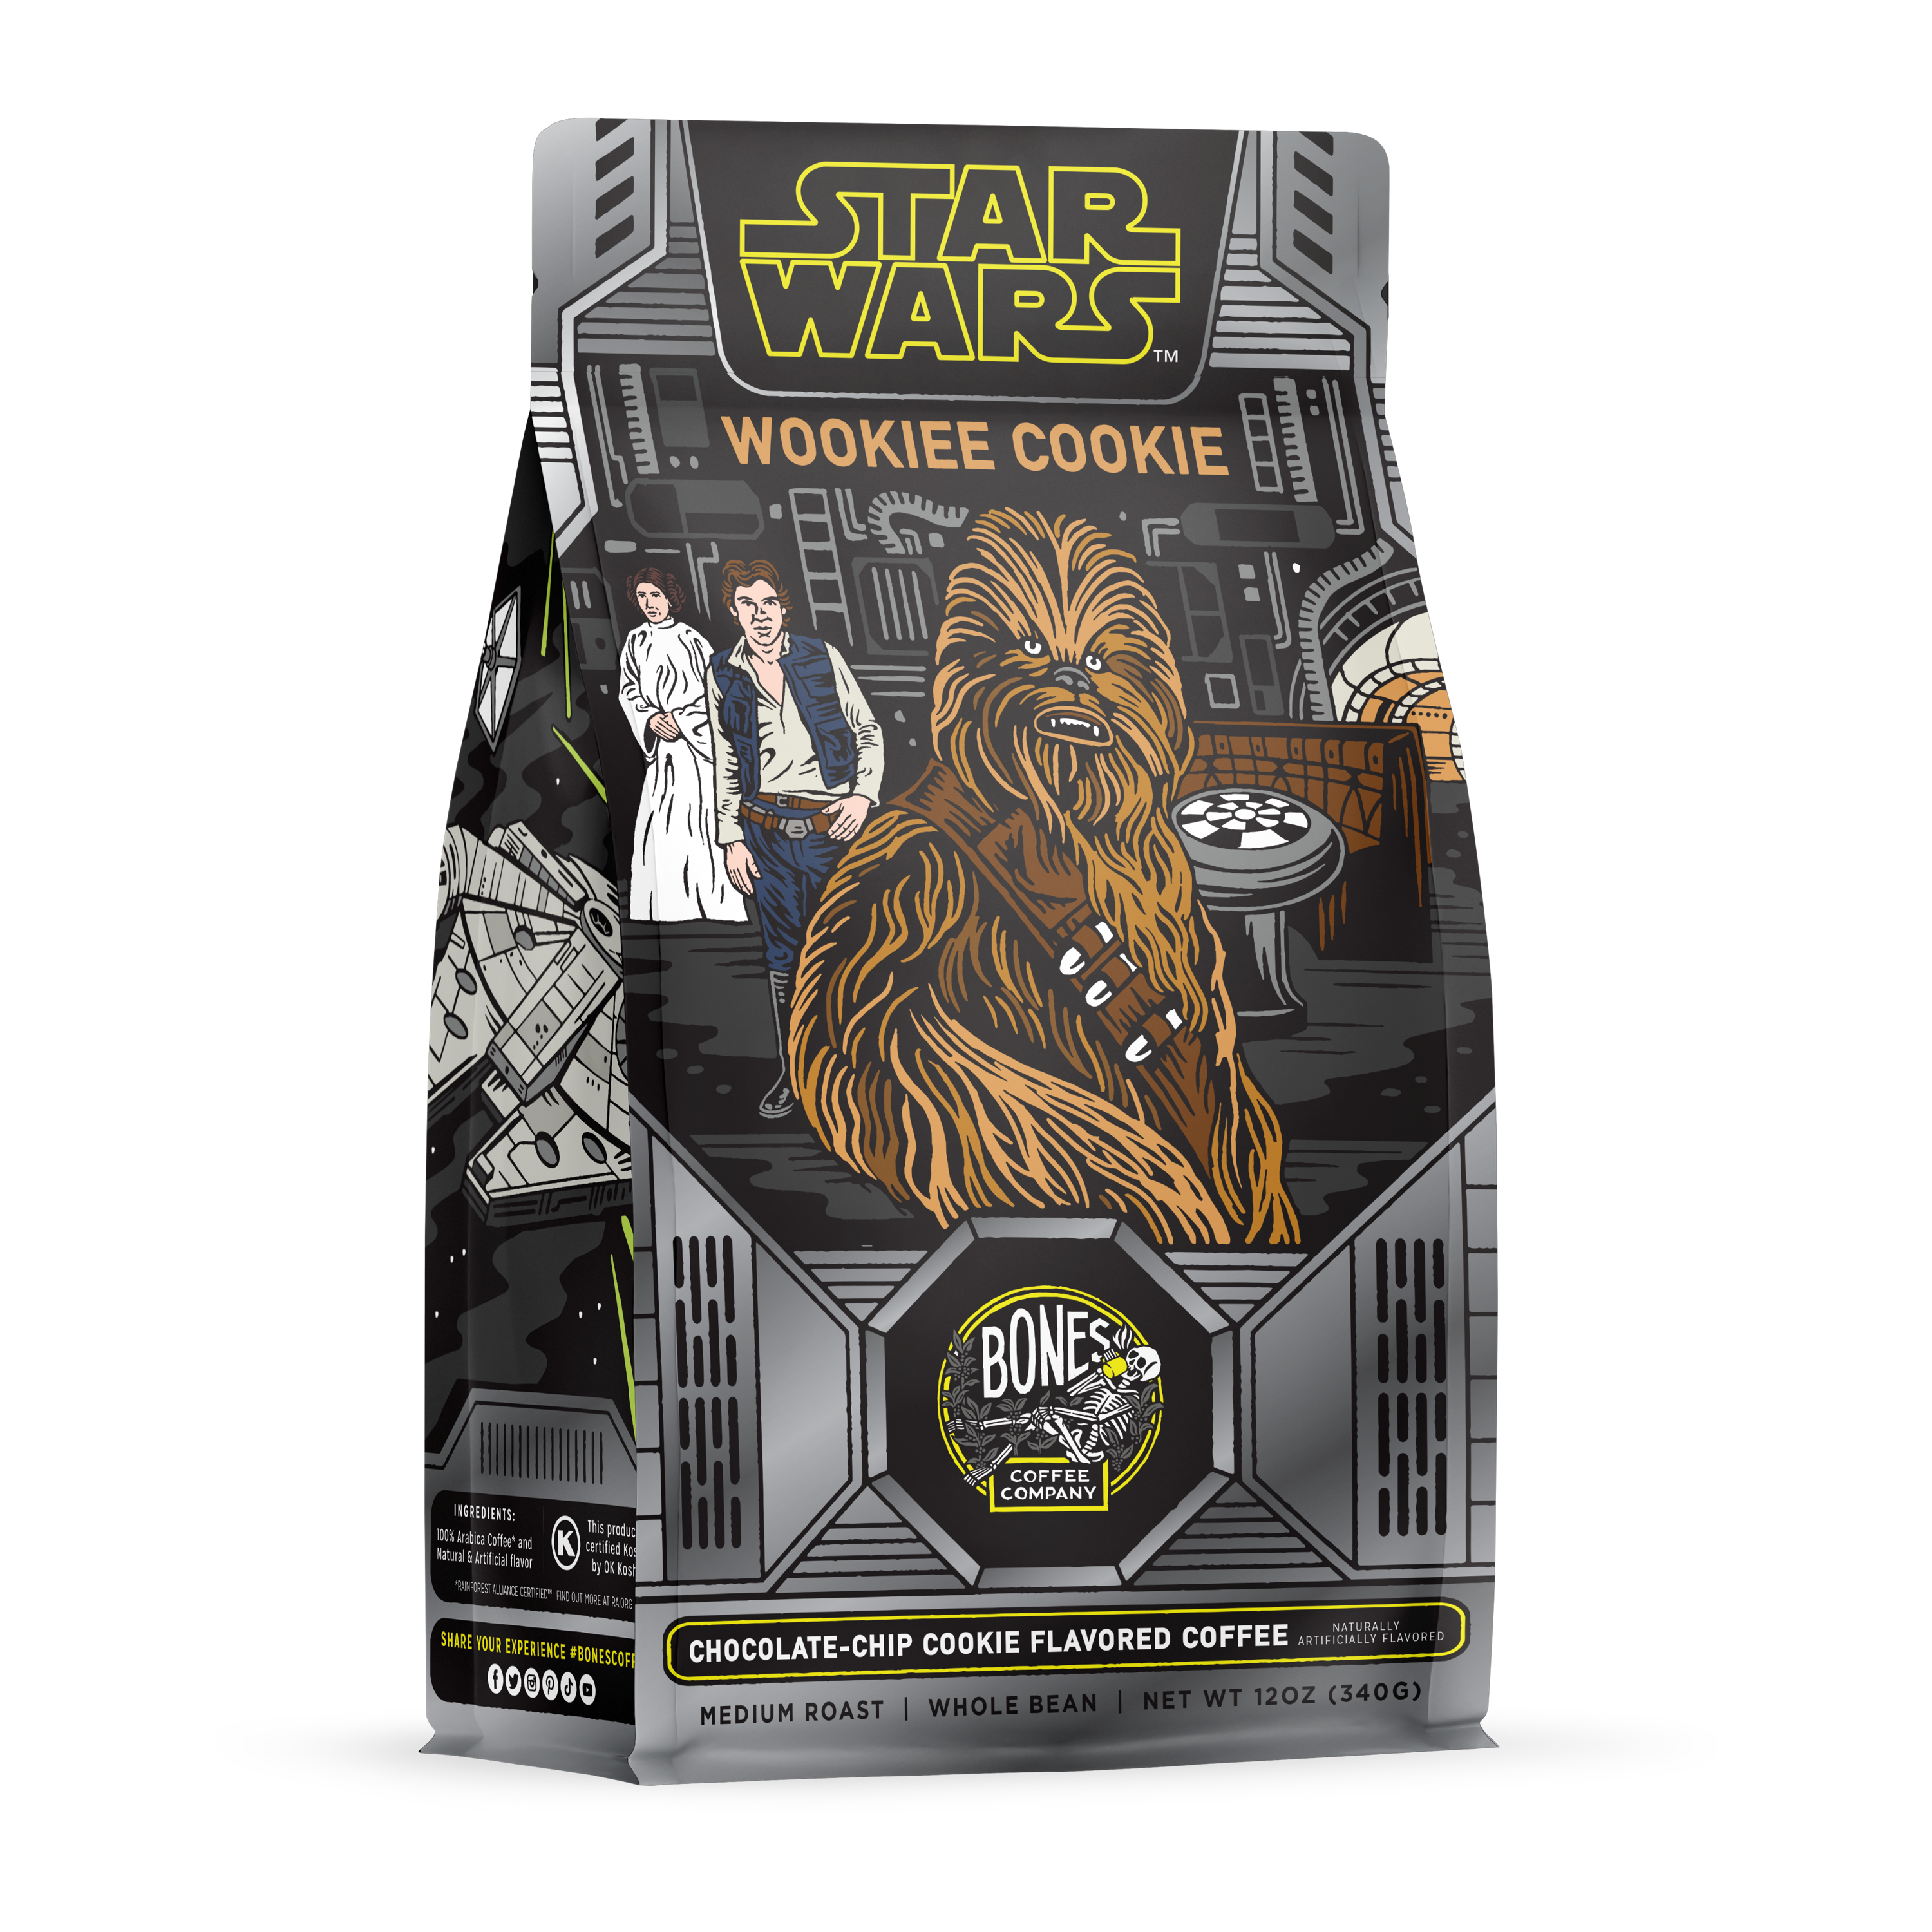 The front of a 12 ounce bag of Bones Coffee Company Wookiee Cookie flavored coffee. Its flavor is chocolate chip cookie, and its art shows Chewy, Han Solo, and Leia on it.